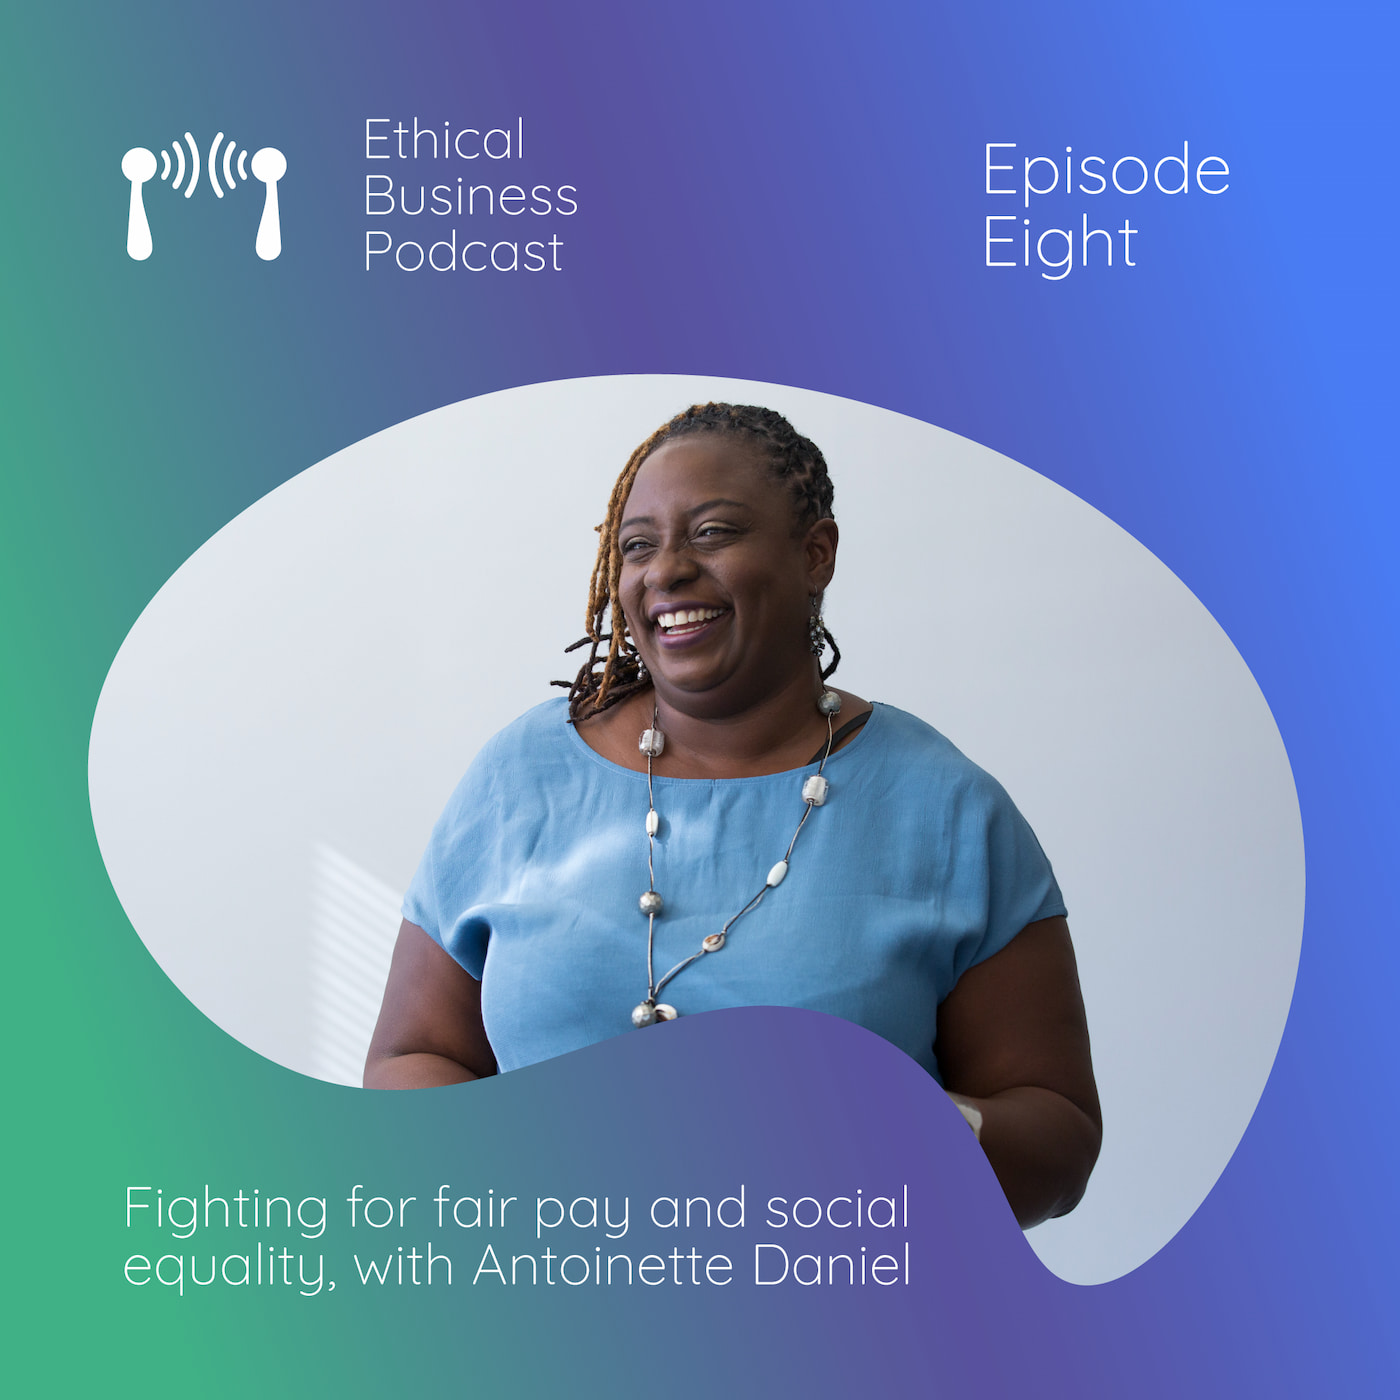 Antoinette Daniels Podcast on Fighting for fair play and social equality